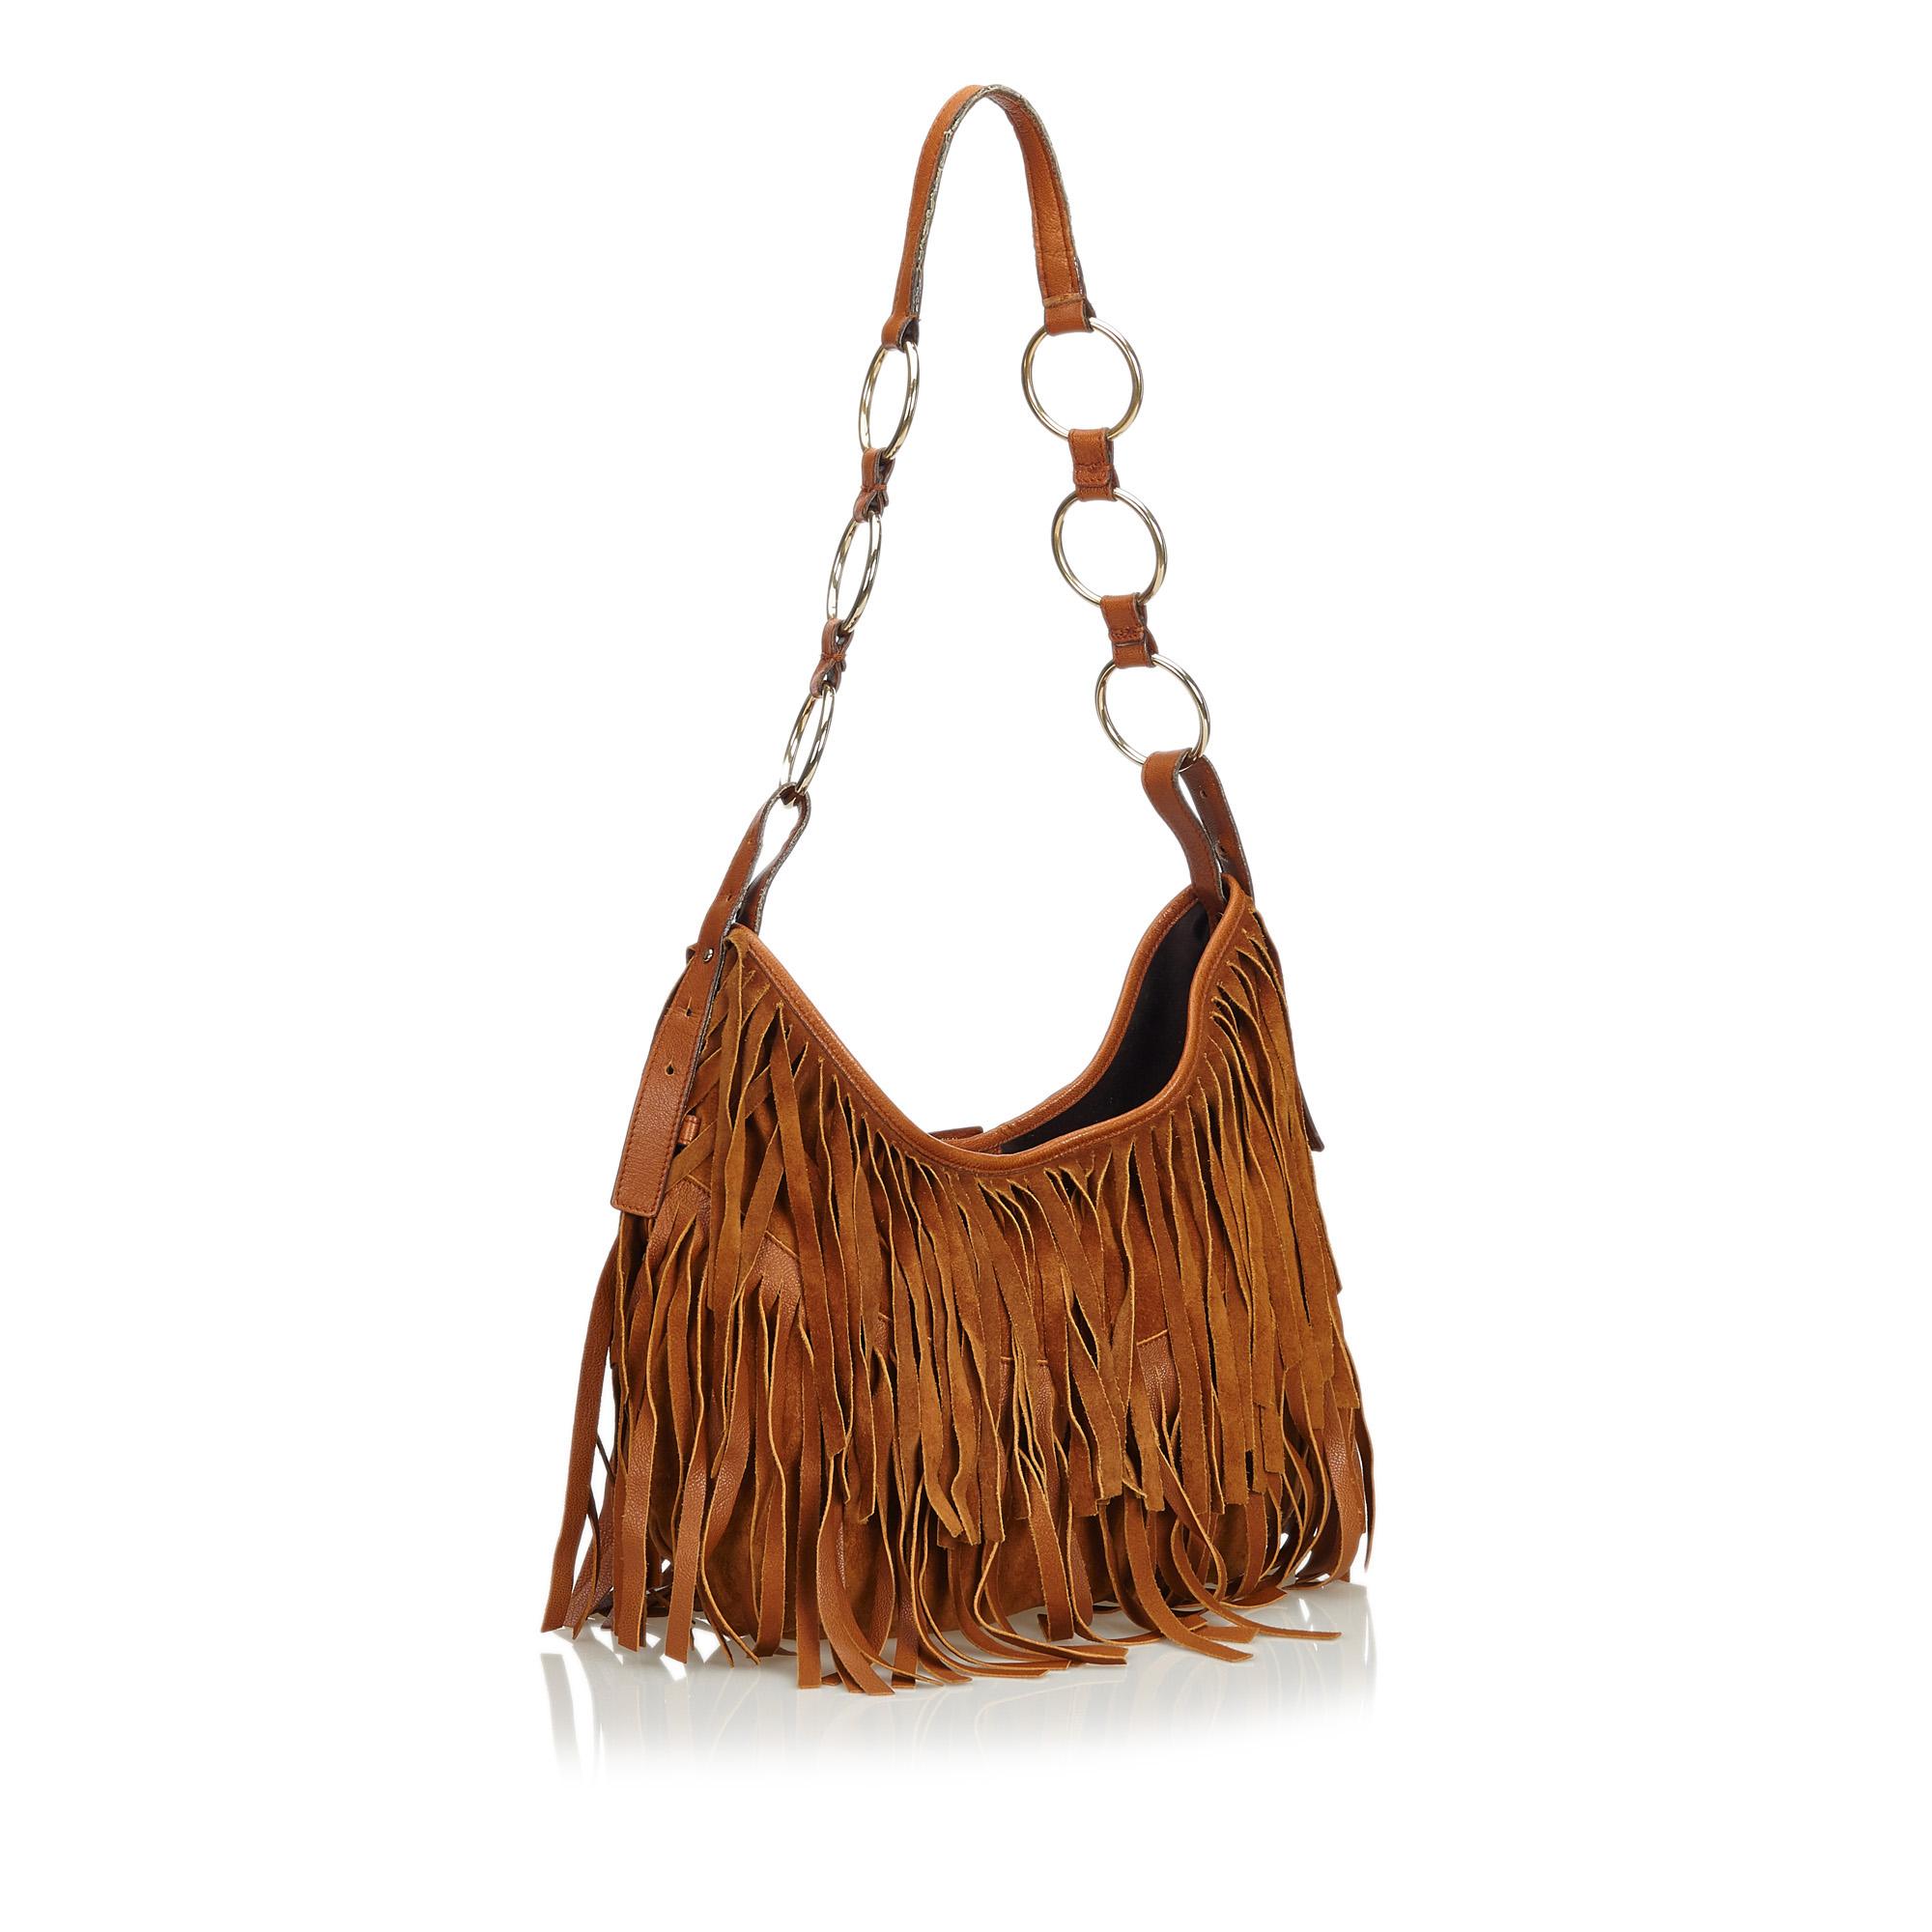 This hobo bag features a fringed suede leather body, a flat leather strap, a top magnetic closure, and an interior slip pocket. It carries as B+ condition rating.

Inclusions: 
This item does not come with inclusions.

Dimensions:
Length: 24.00